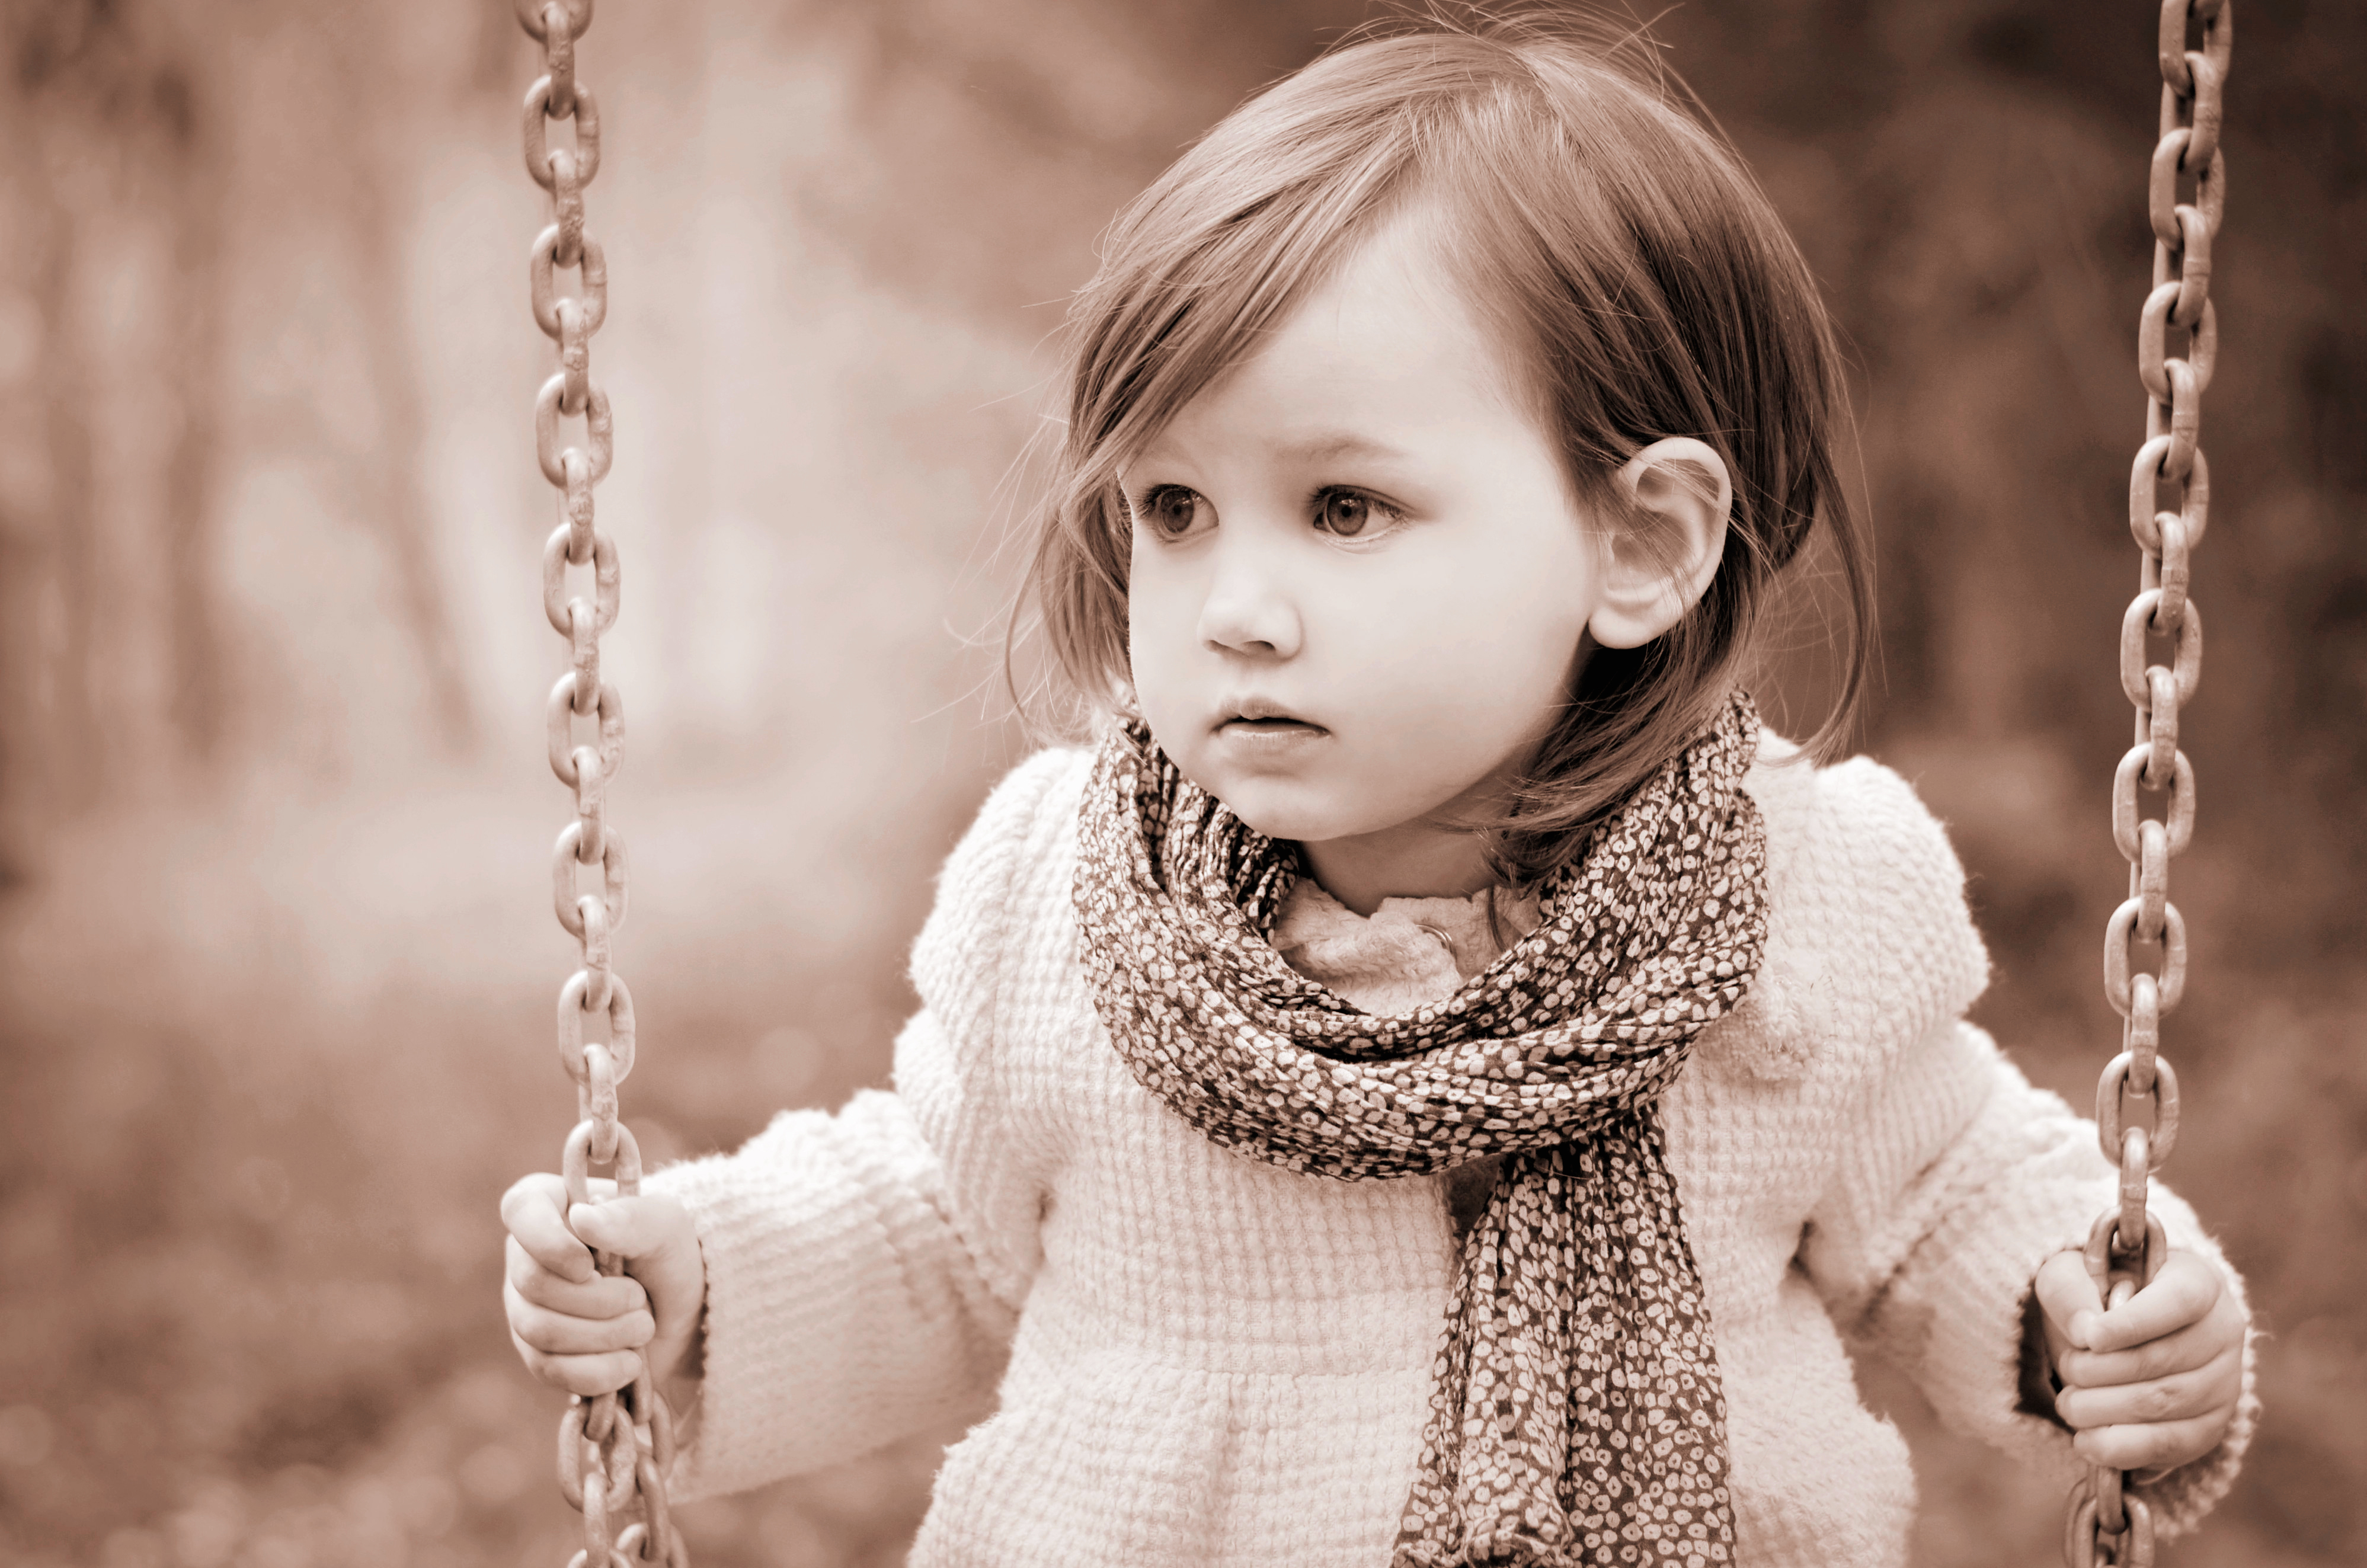 sepia, photography, child, cute, little girl